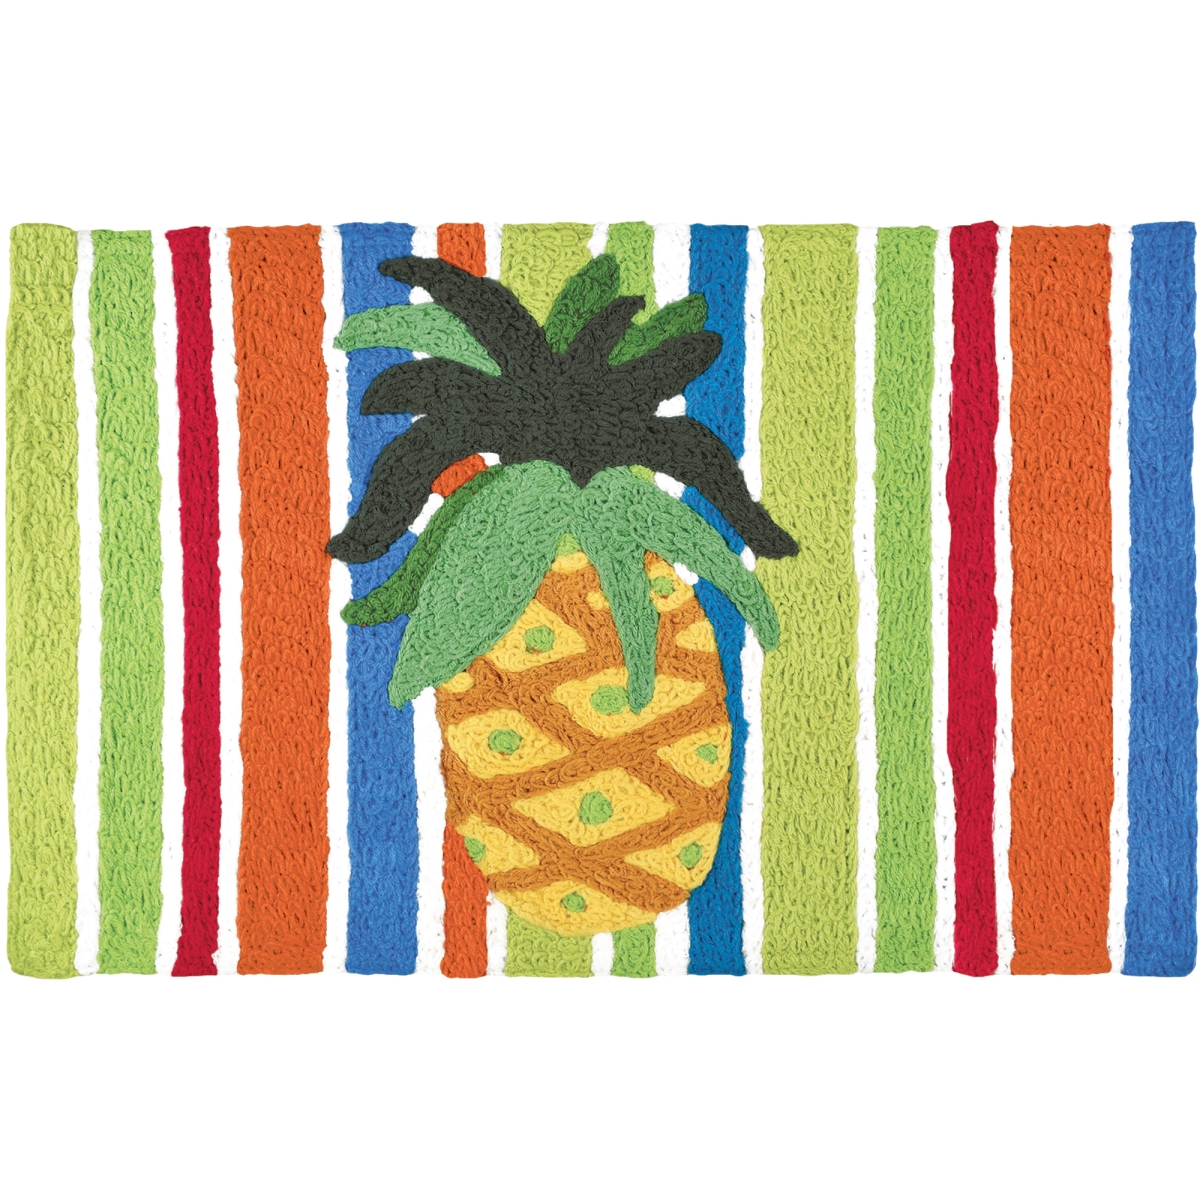 Jb-ll004 20 X 30 In. Pineapple On Watercolored Stripes Rug